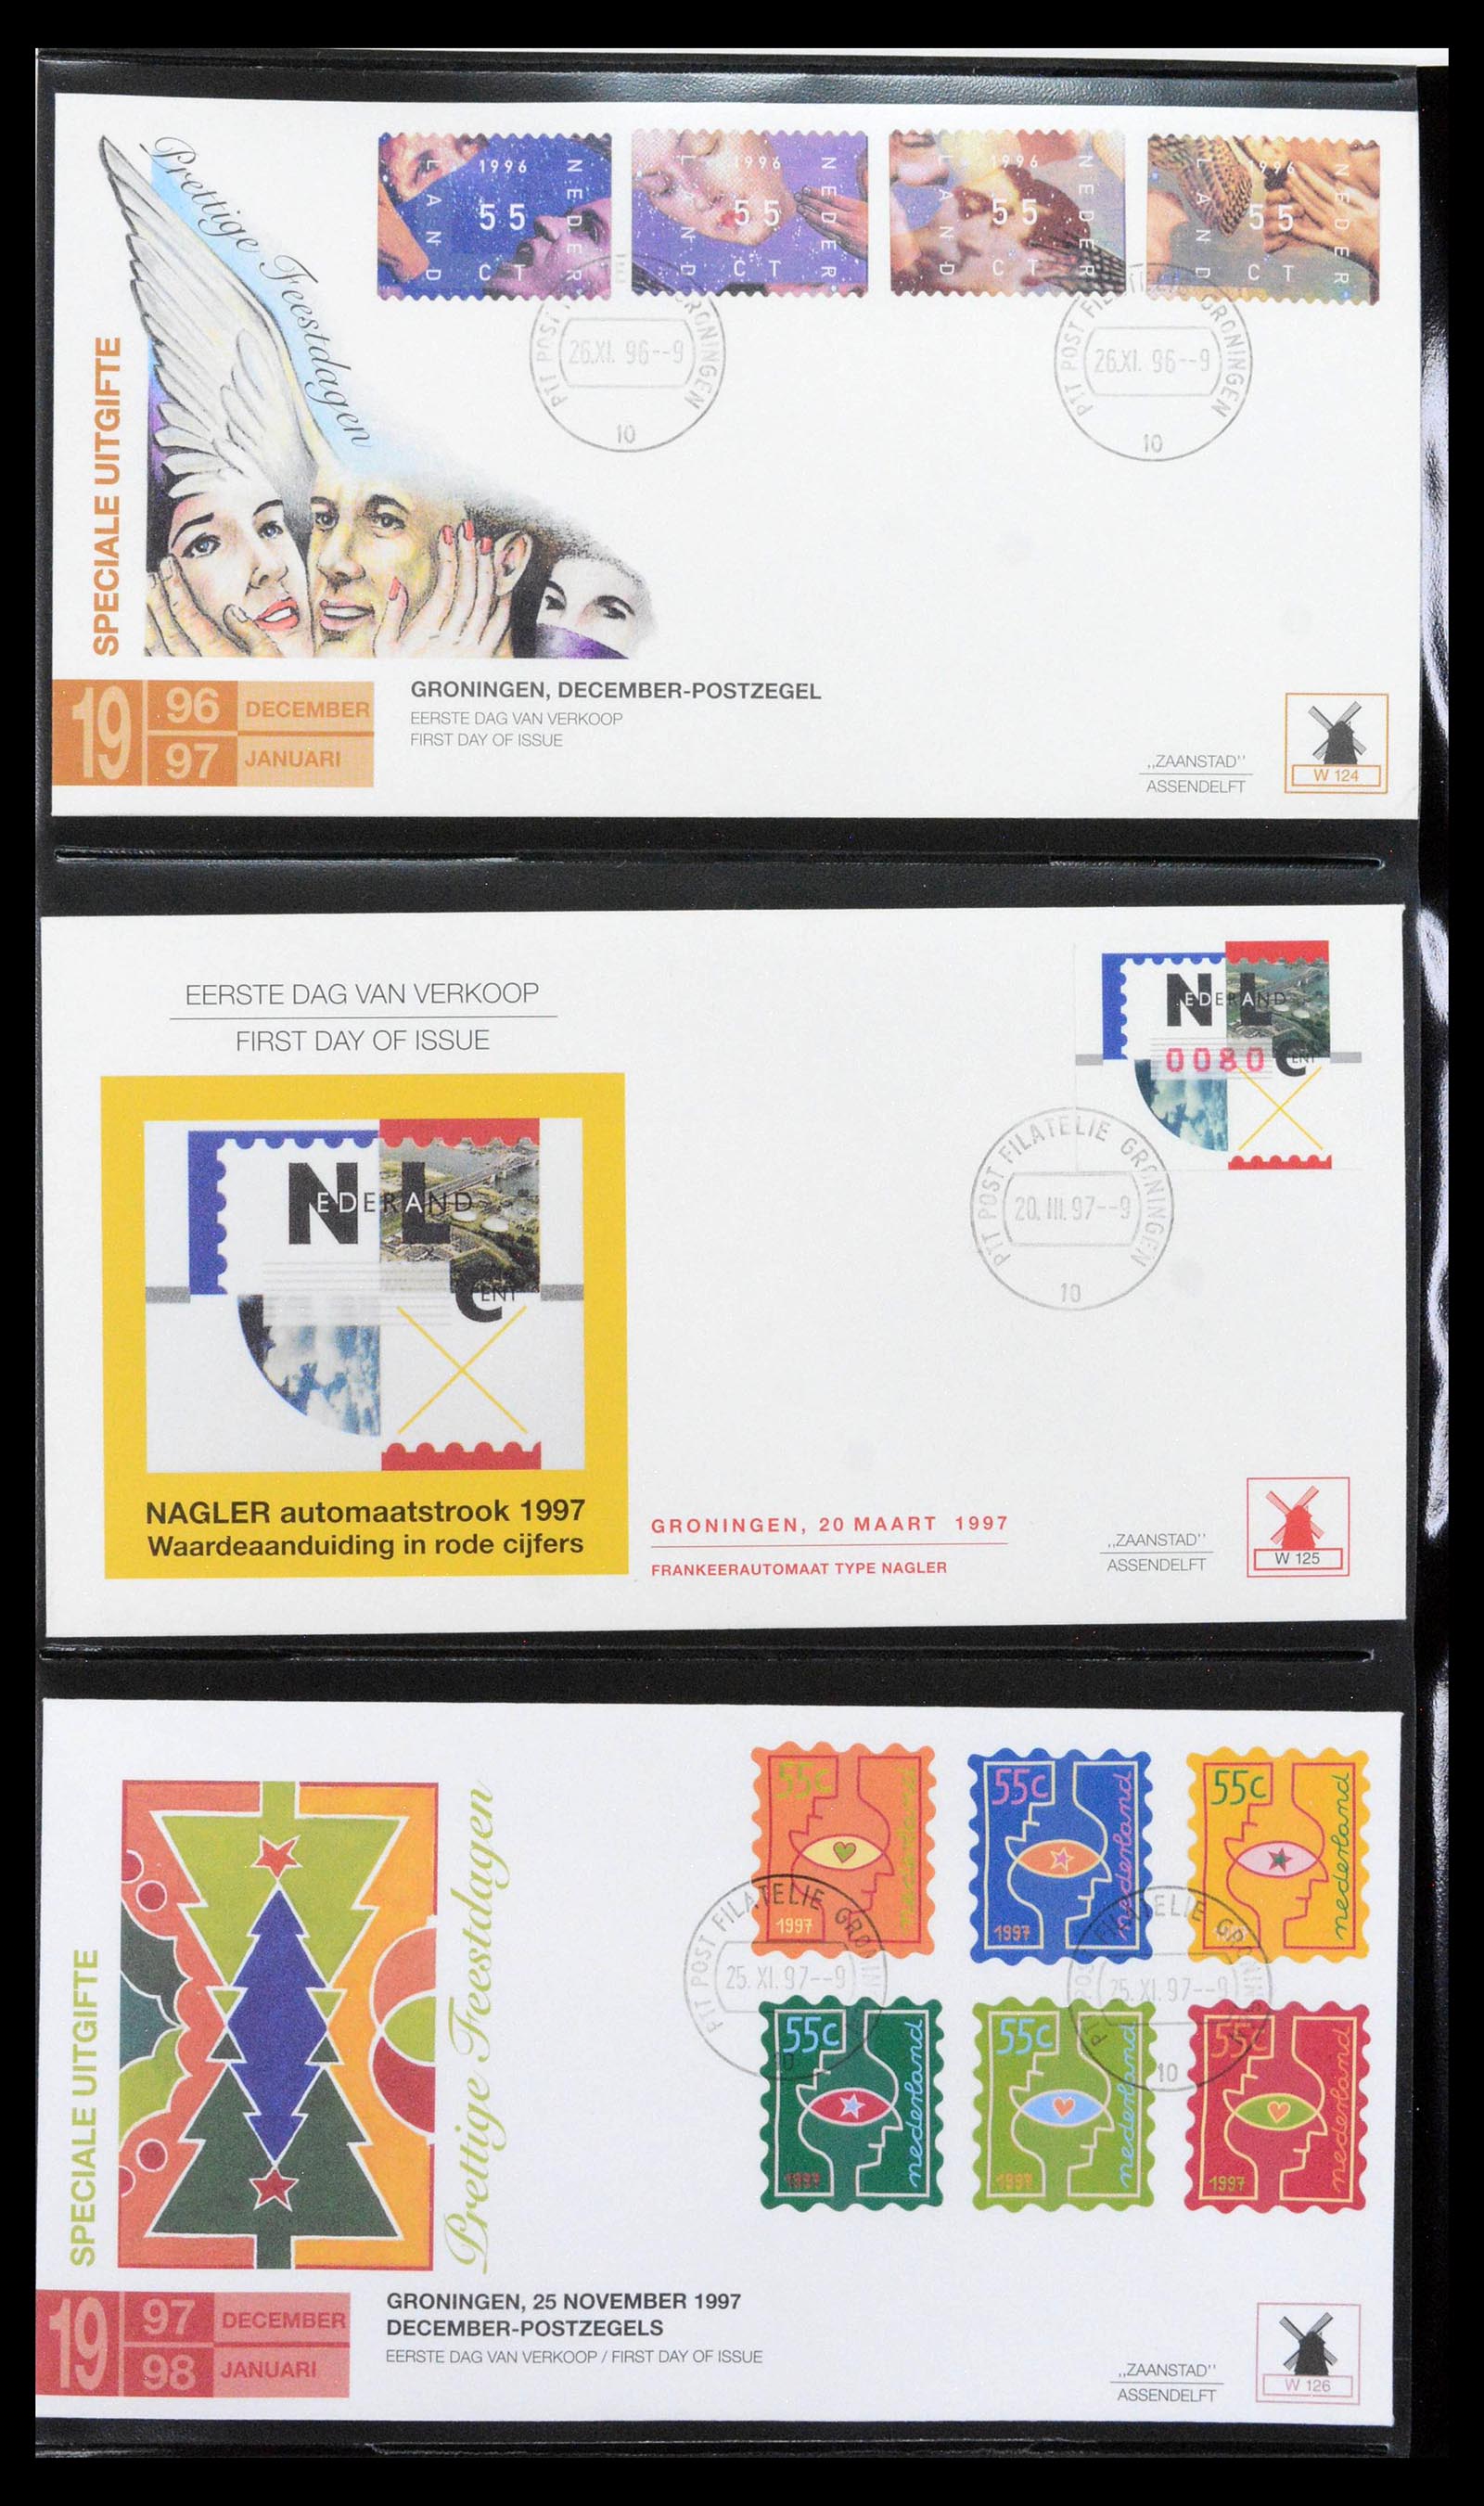 38559 0044 - Stamp collection 38559 Netherlands special first day covers.